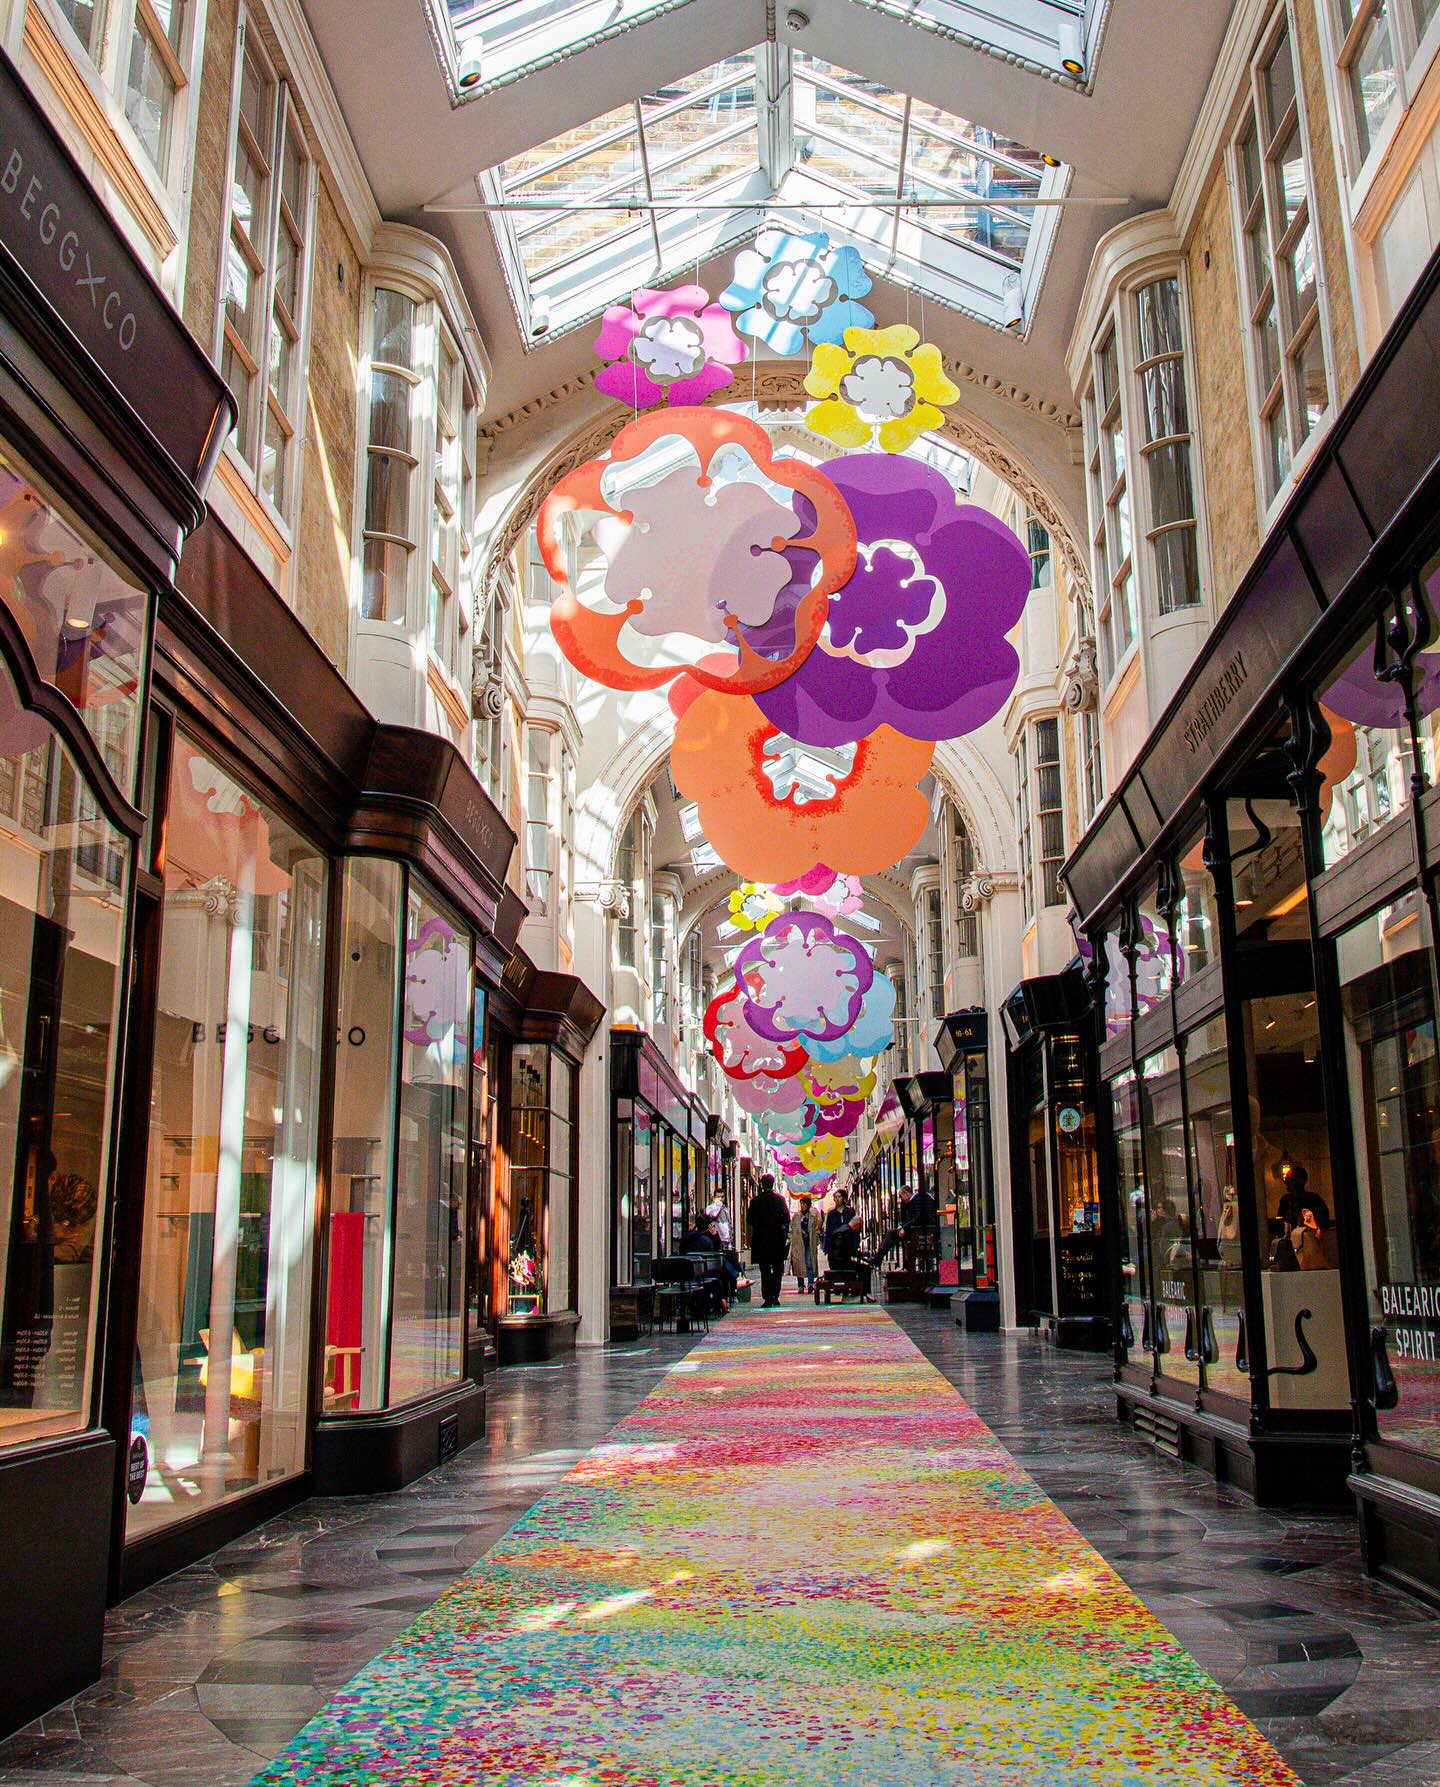 How to Spend a Day in Mayfair, London